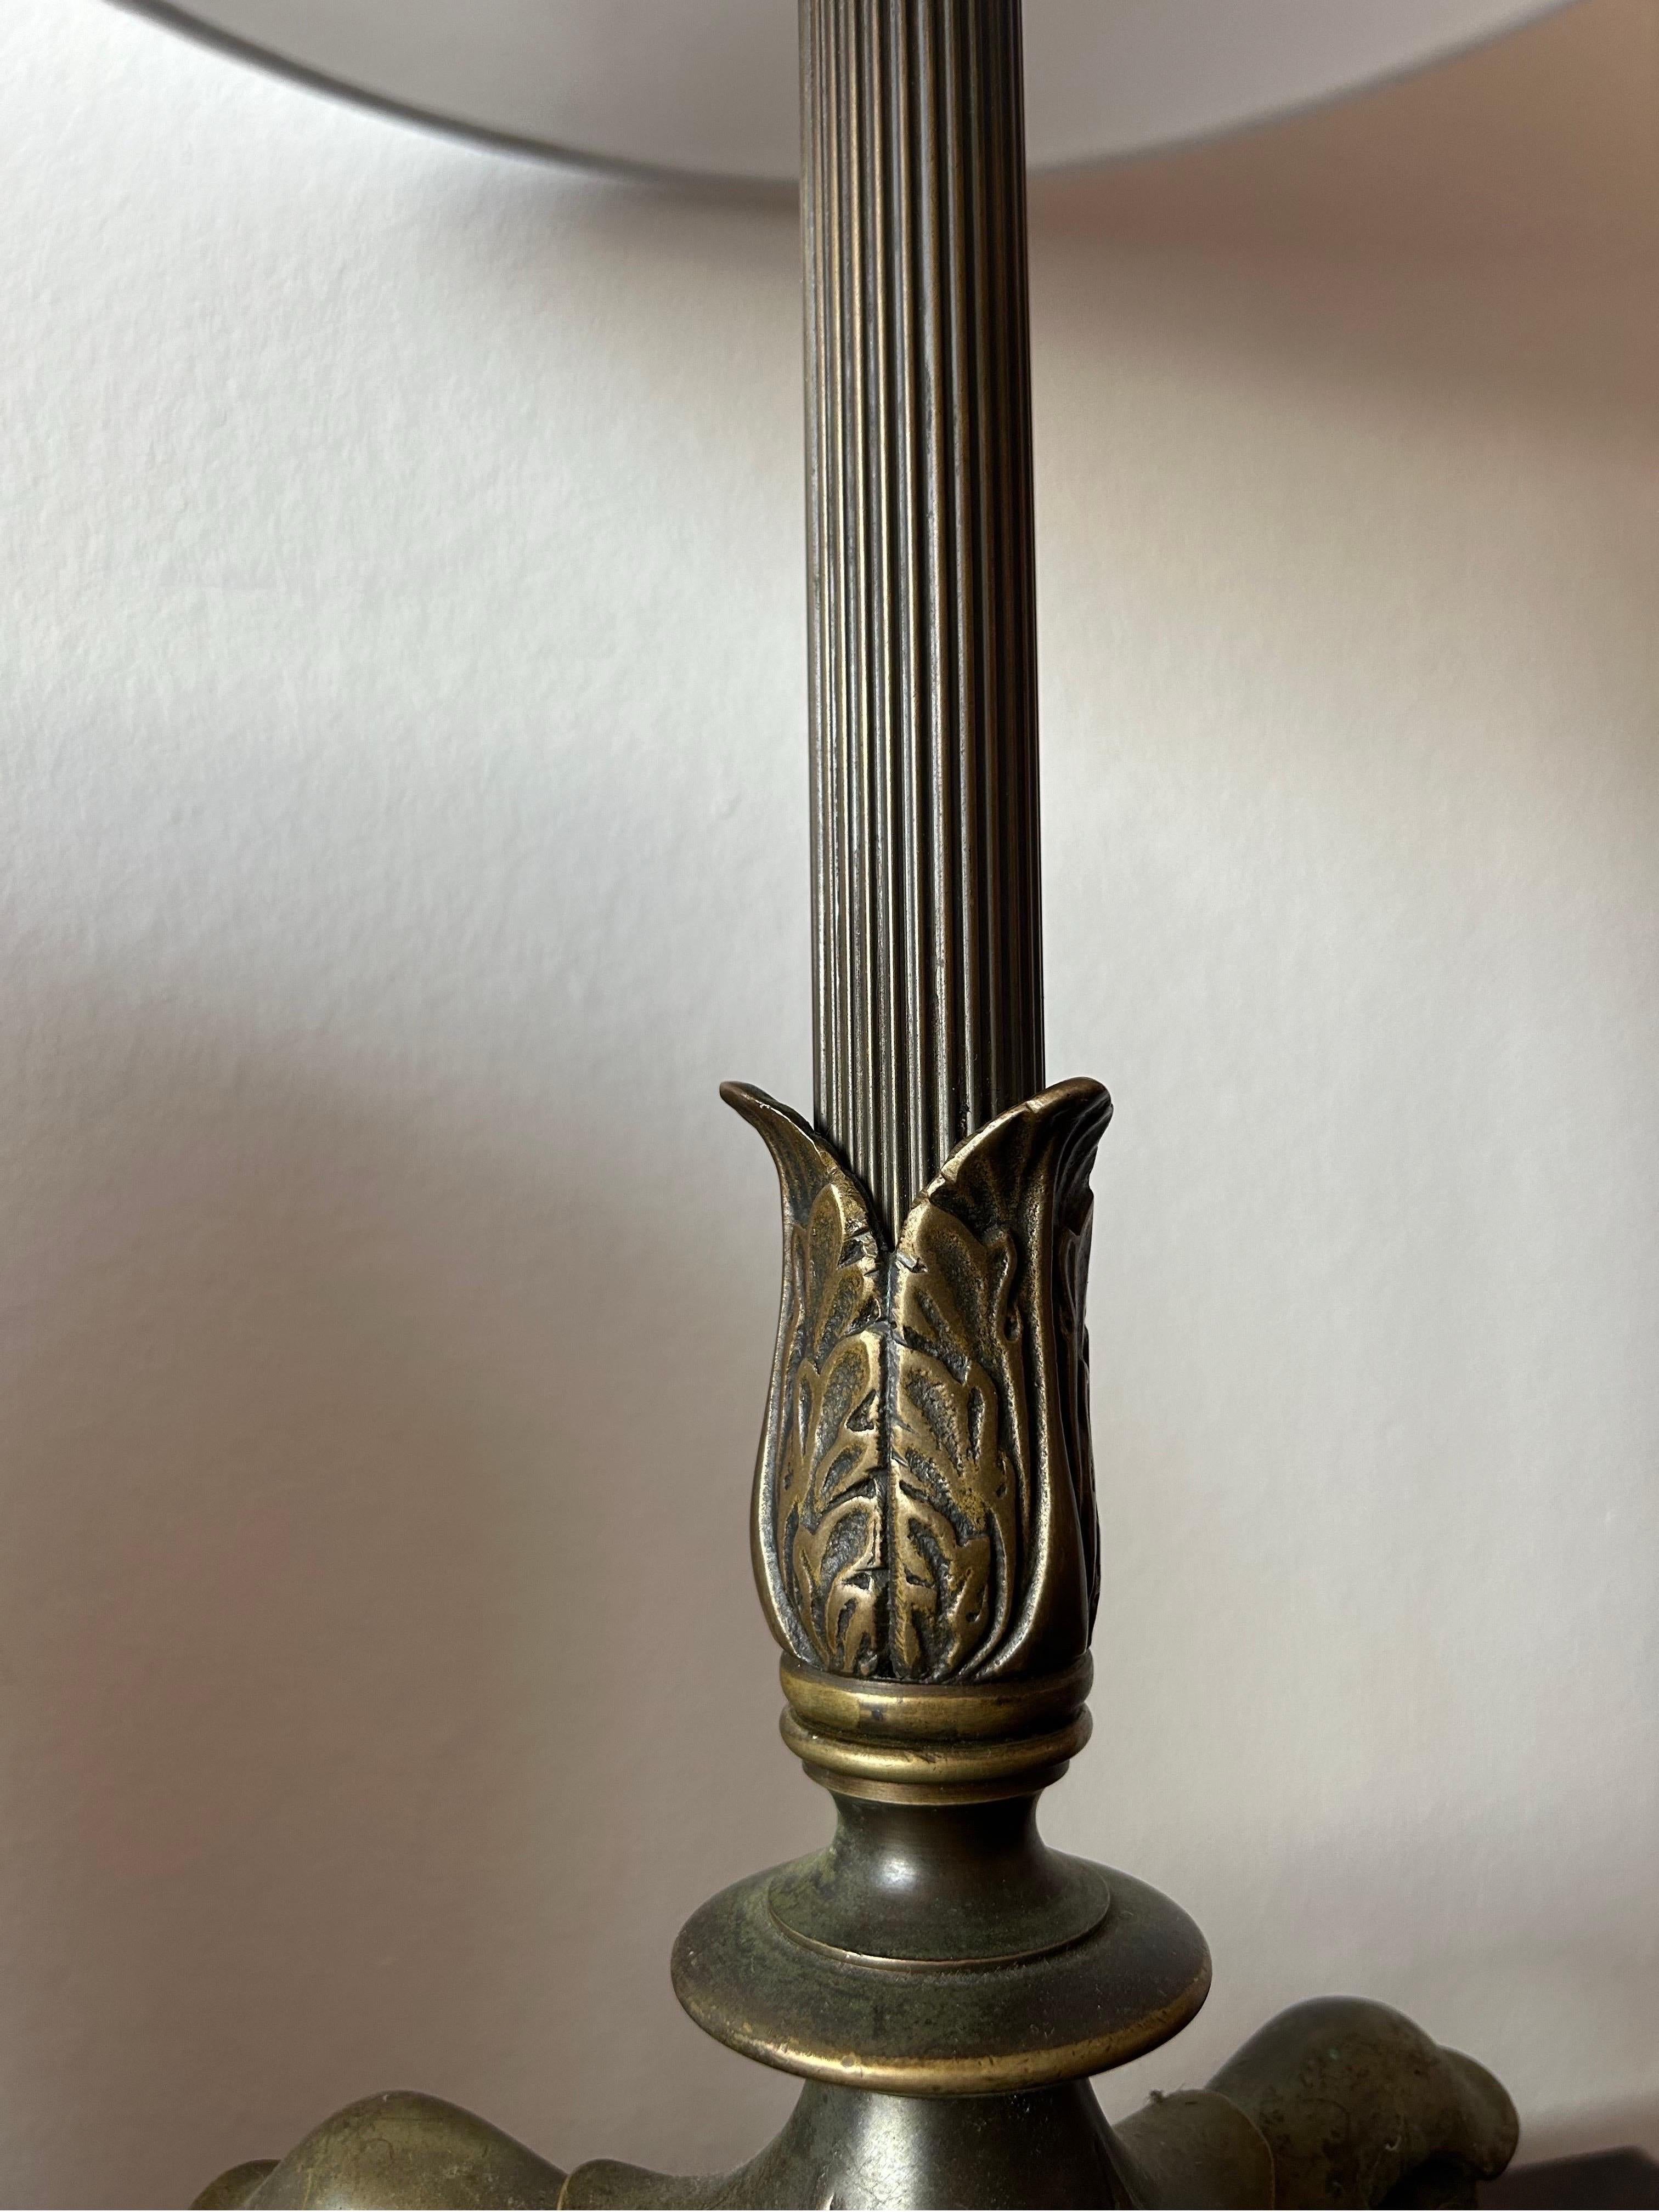 Bronze Table Lamp by Danish Sculptor TH Stein Denmark 1850’s In Good Condition For Sale In Valby, 84